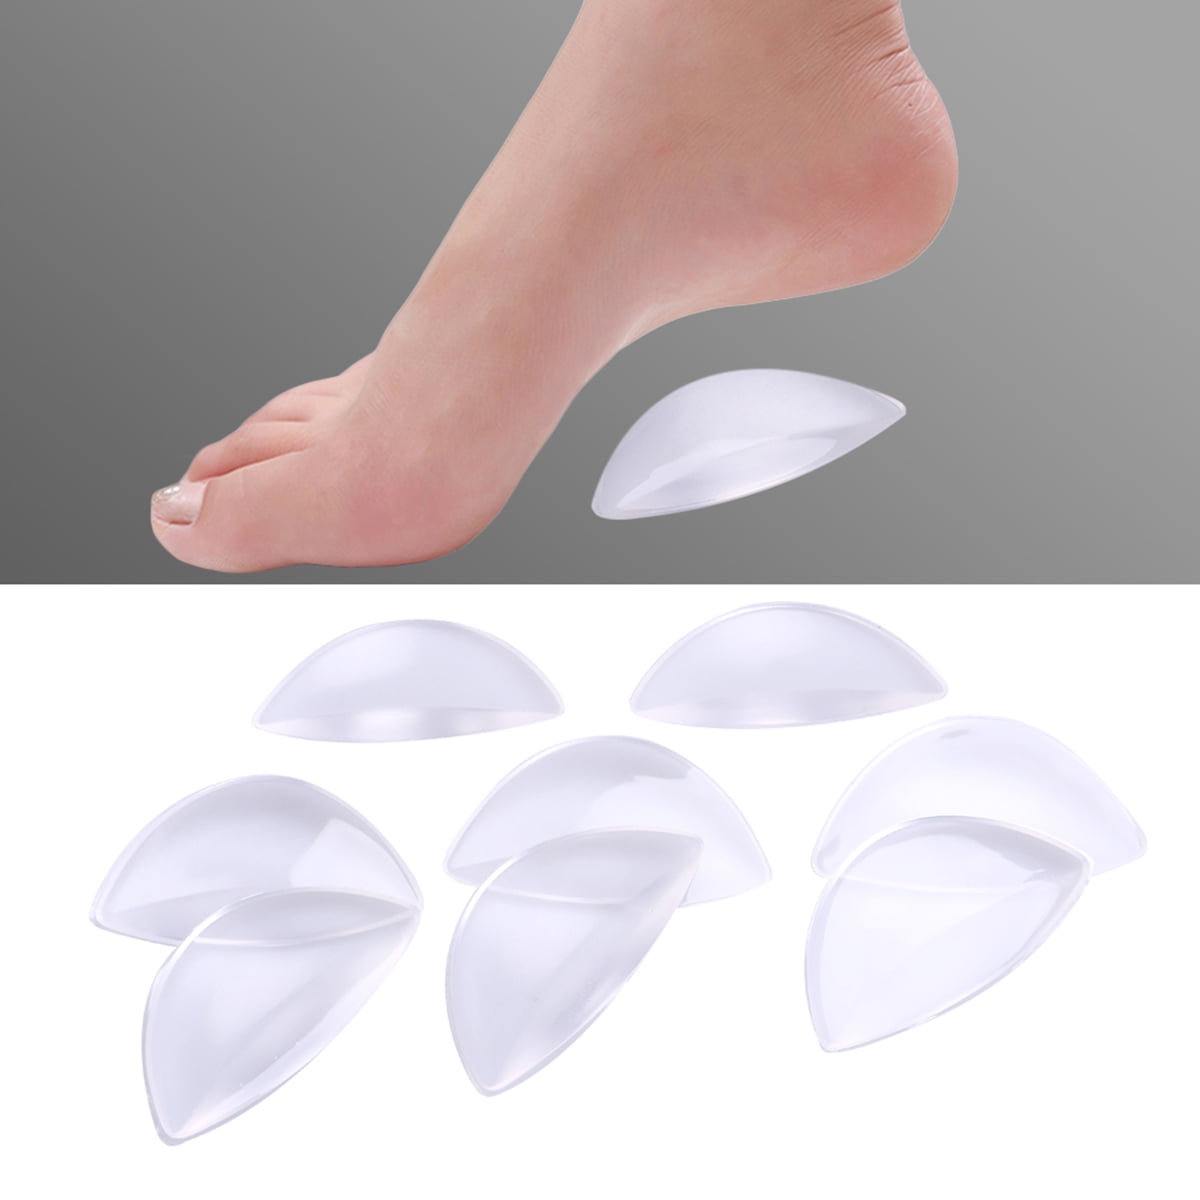 1 pair Silicone Gel Insoles Shoe Pads for Arch Flat Feet Clear T6N4 